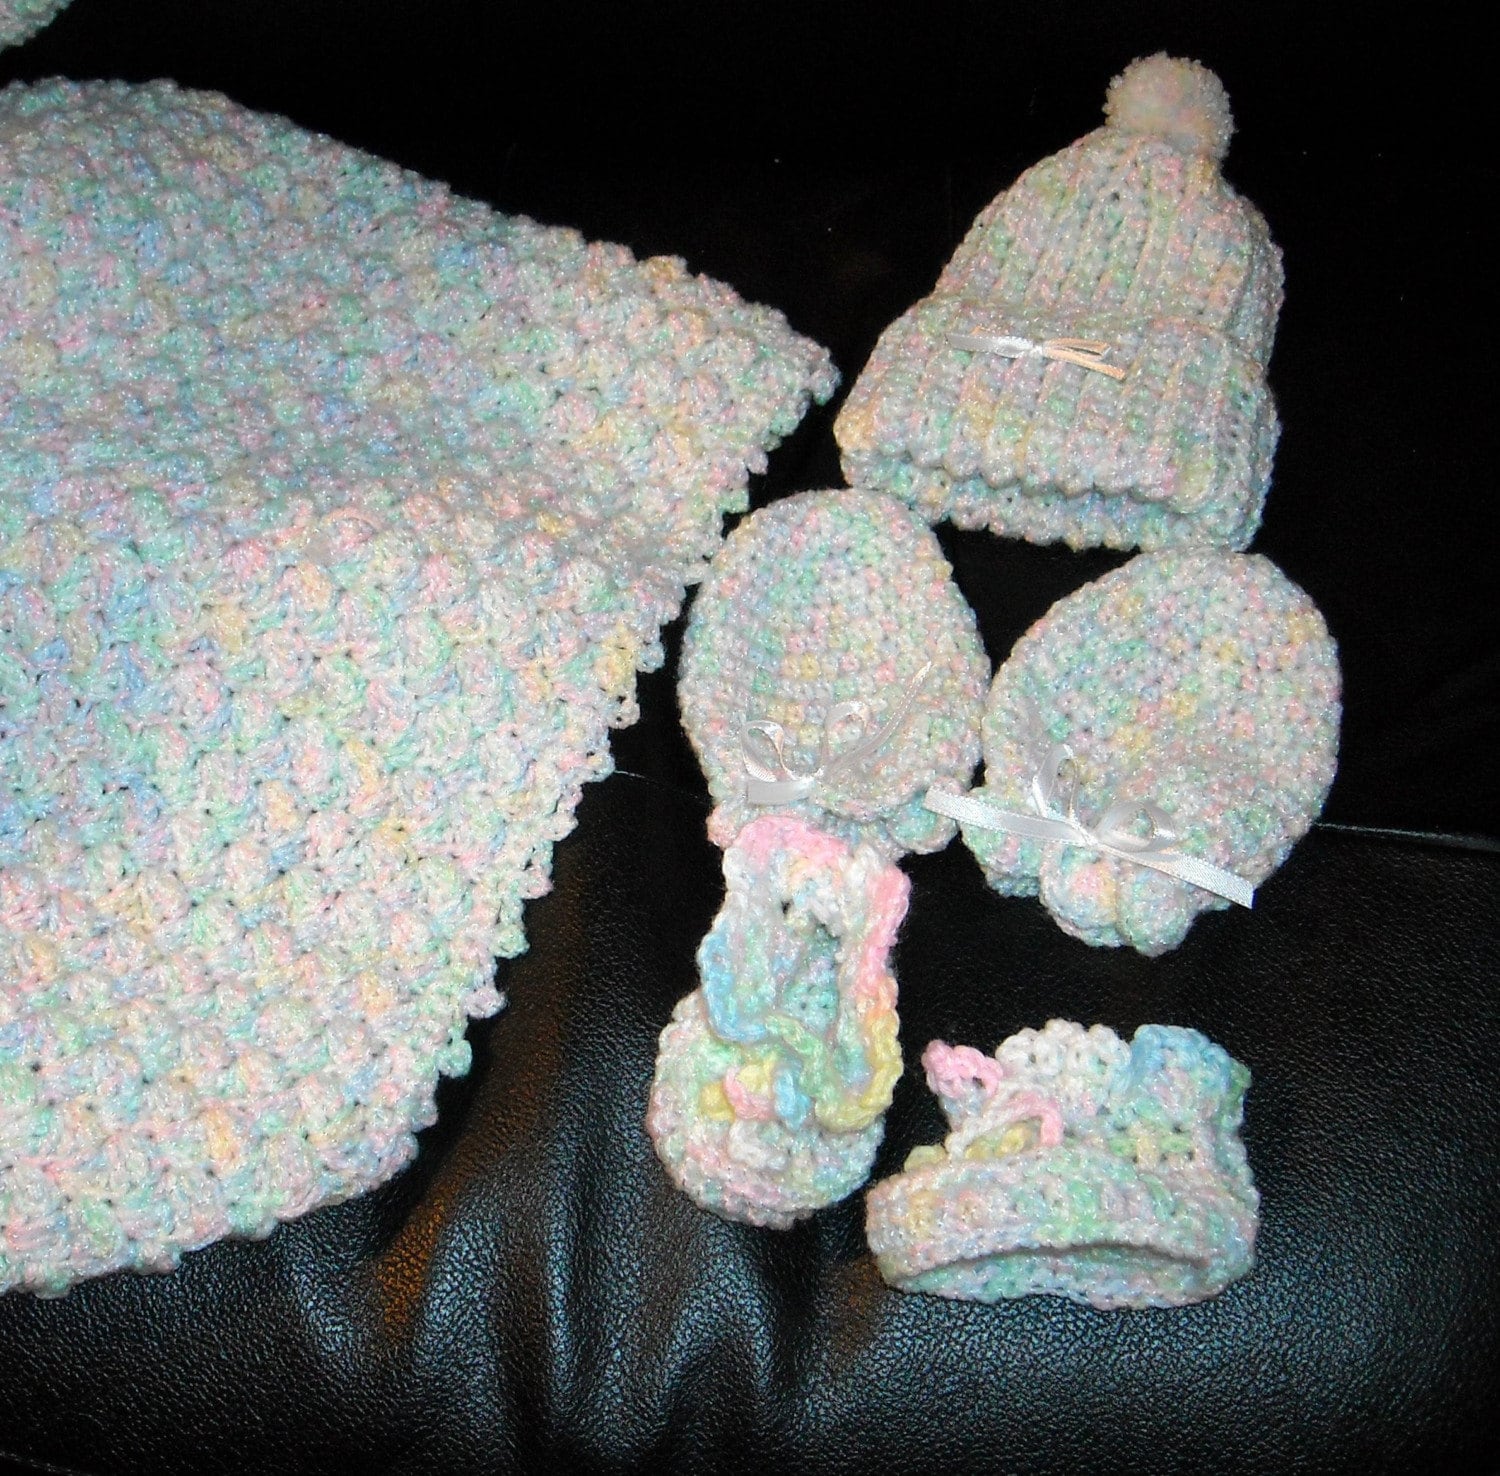 Baby Blanket and Booties Crocheted by Helnzoo2 - Reader